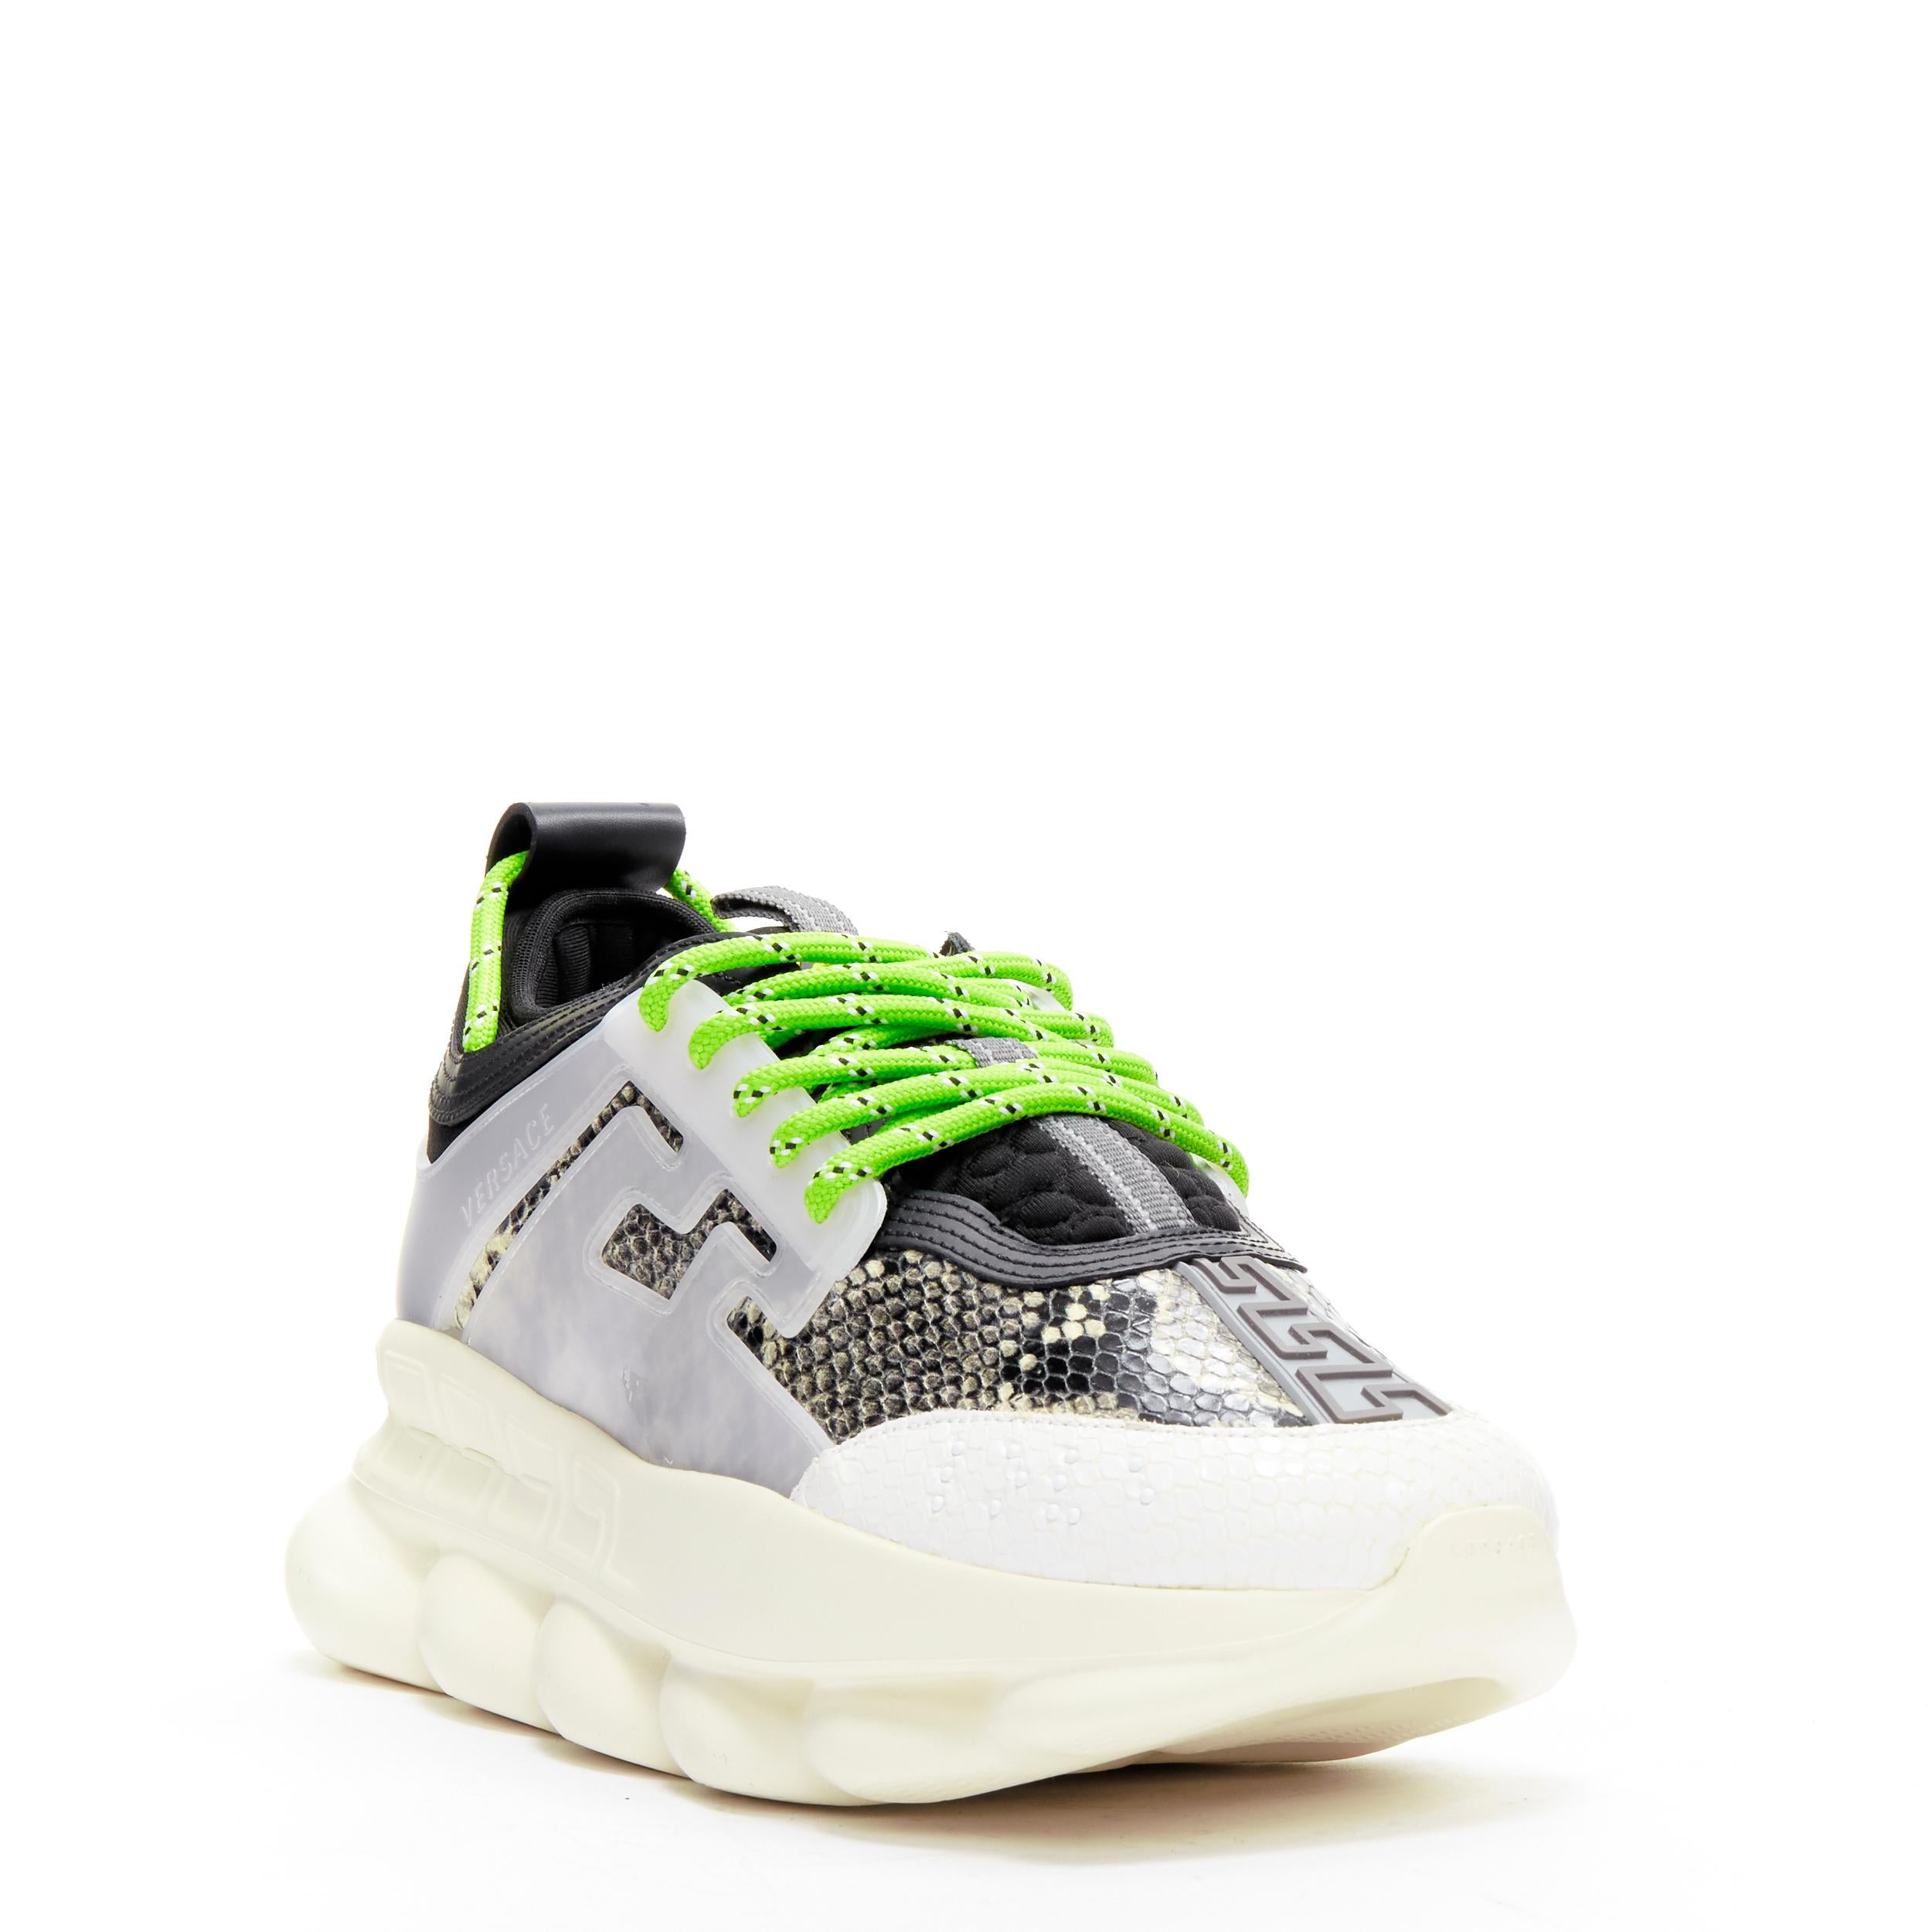 new VERSACE Chain Reaction Salehe Bembury grey scaled green sneaker EU39.5

Reference: TGAS/A06349

Brand: Versace

Designer: Salehe Bembury

Model: Versace Chain Reaction

Material: Fabric, Leather

Color: Grey, Green

Pattern: Solid

Closure: Lace